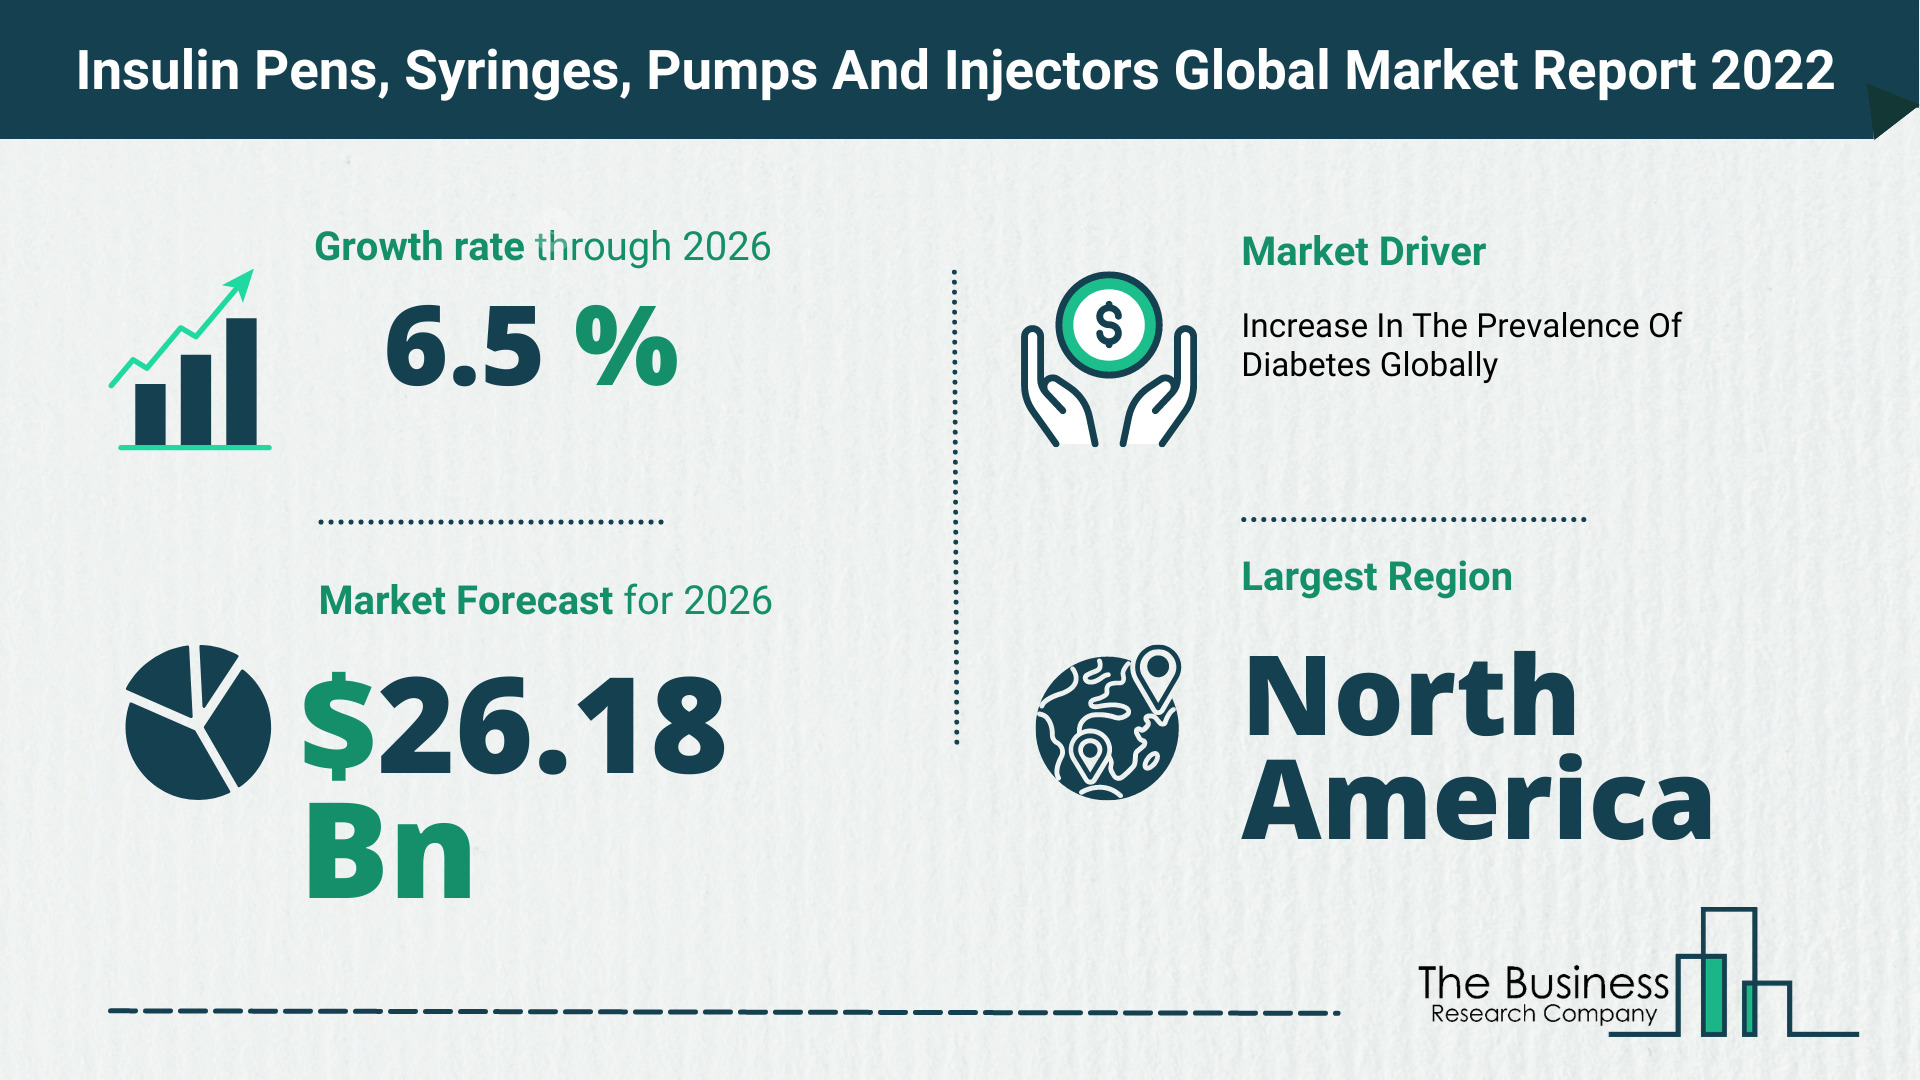 How Will The Insulin Pens, Syringes, Pumps And Injectors Market Grow In 2022?